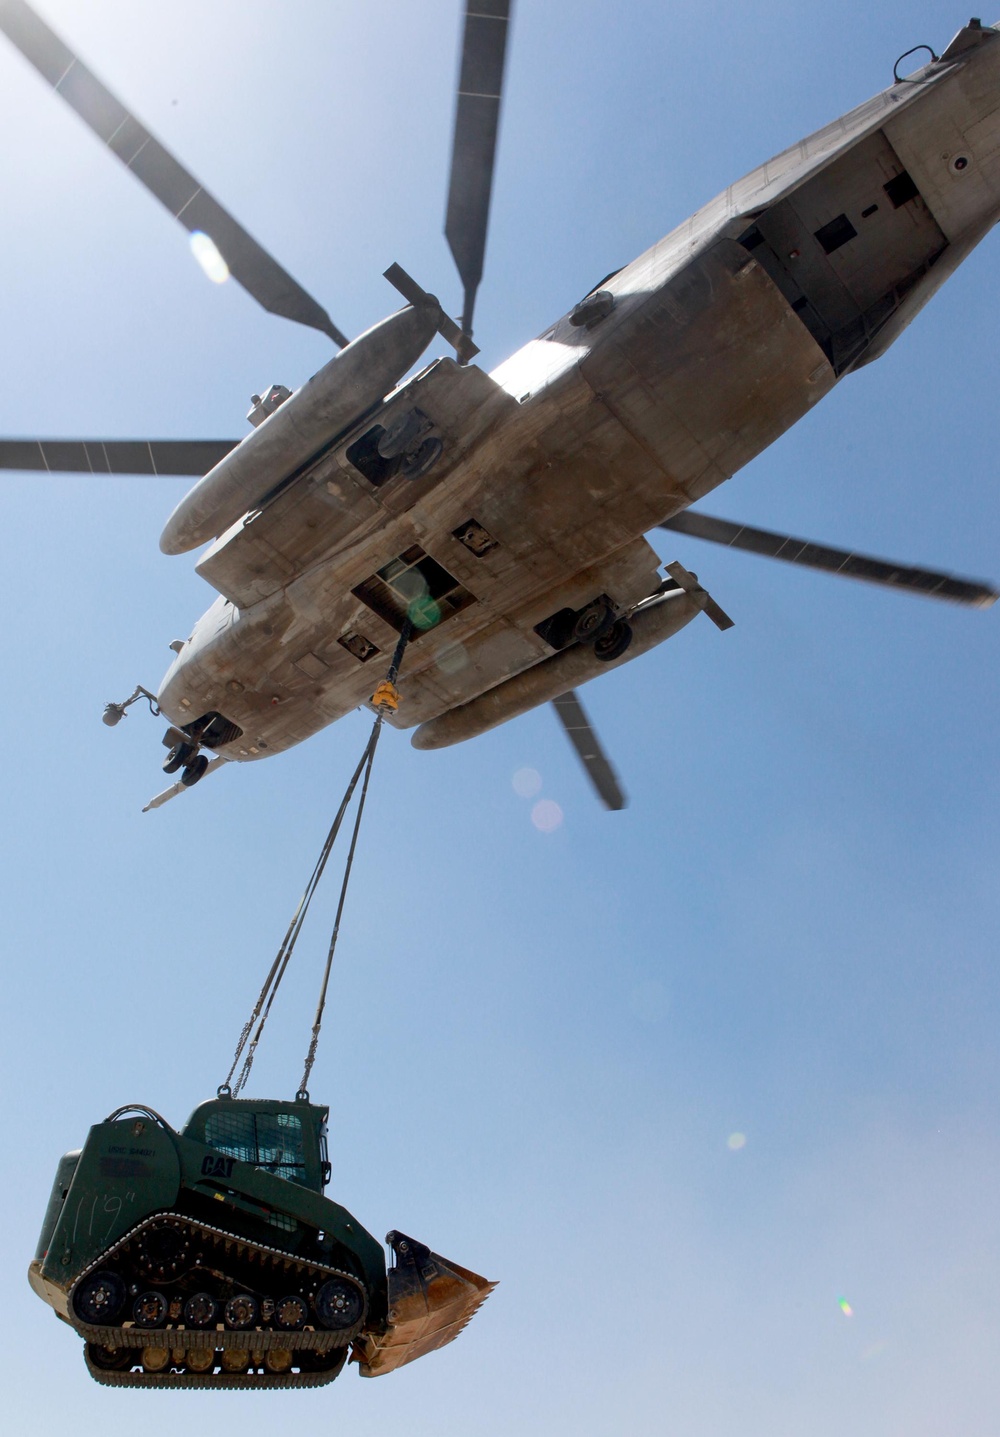 Helicopter support team sends heavy equipment via air